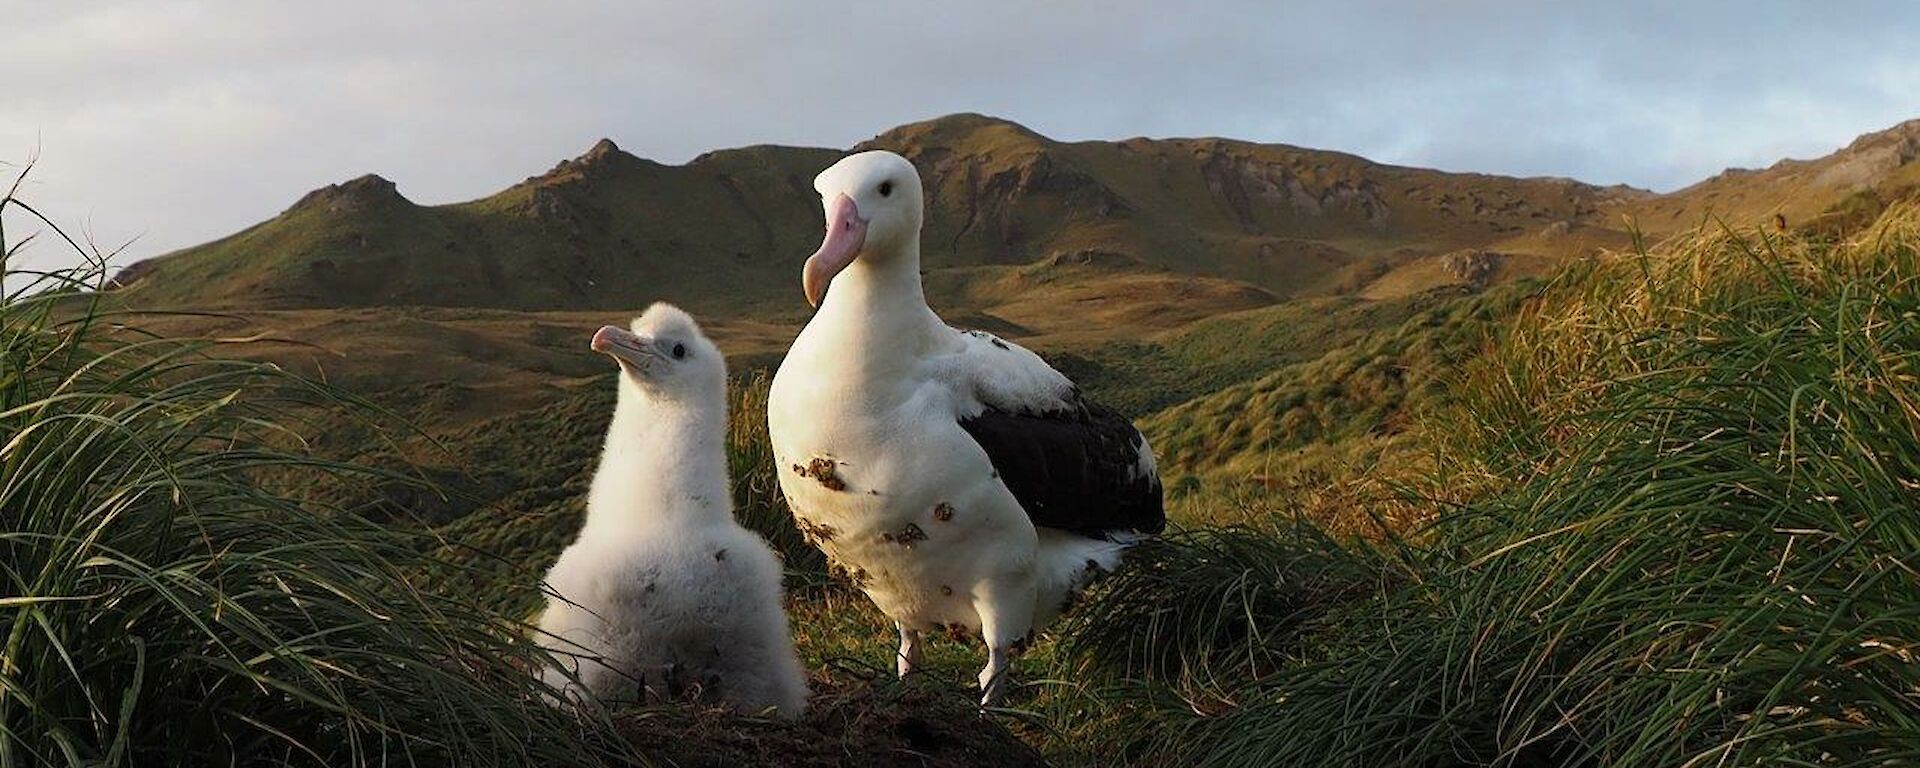 Wandering albatross chick with adult in the Amphitheatre in April 2016